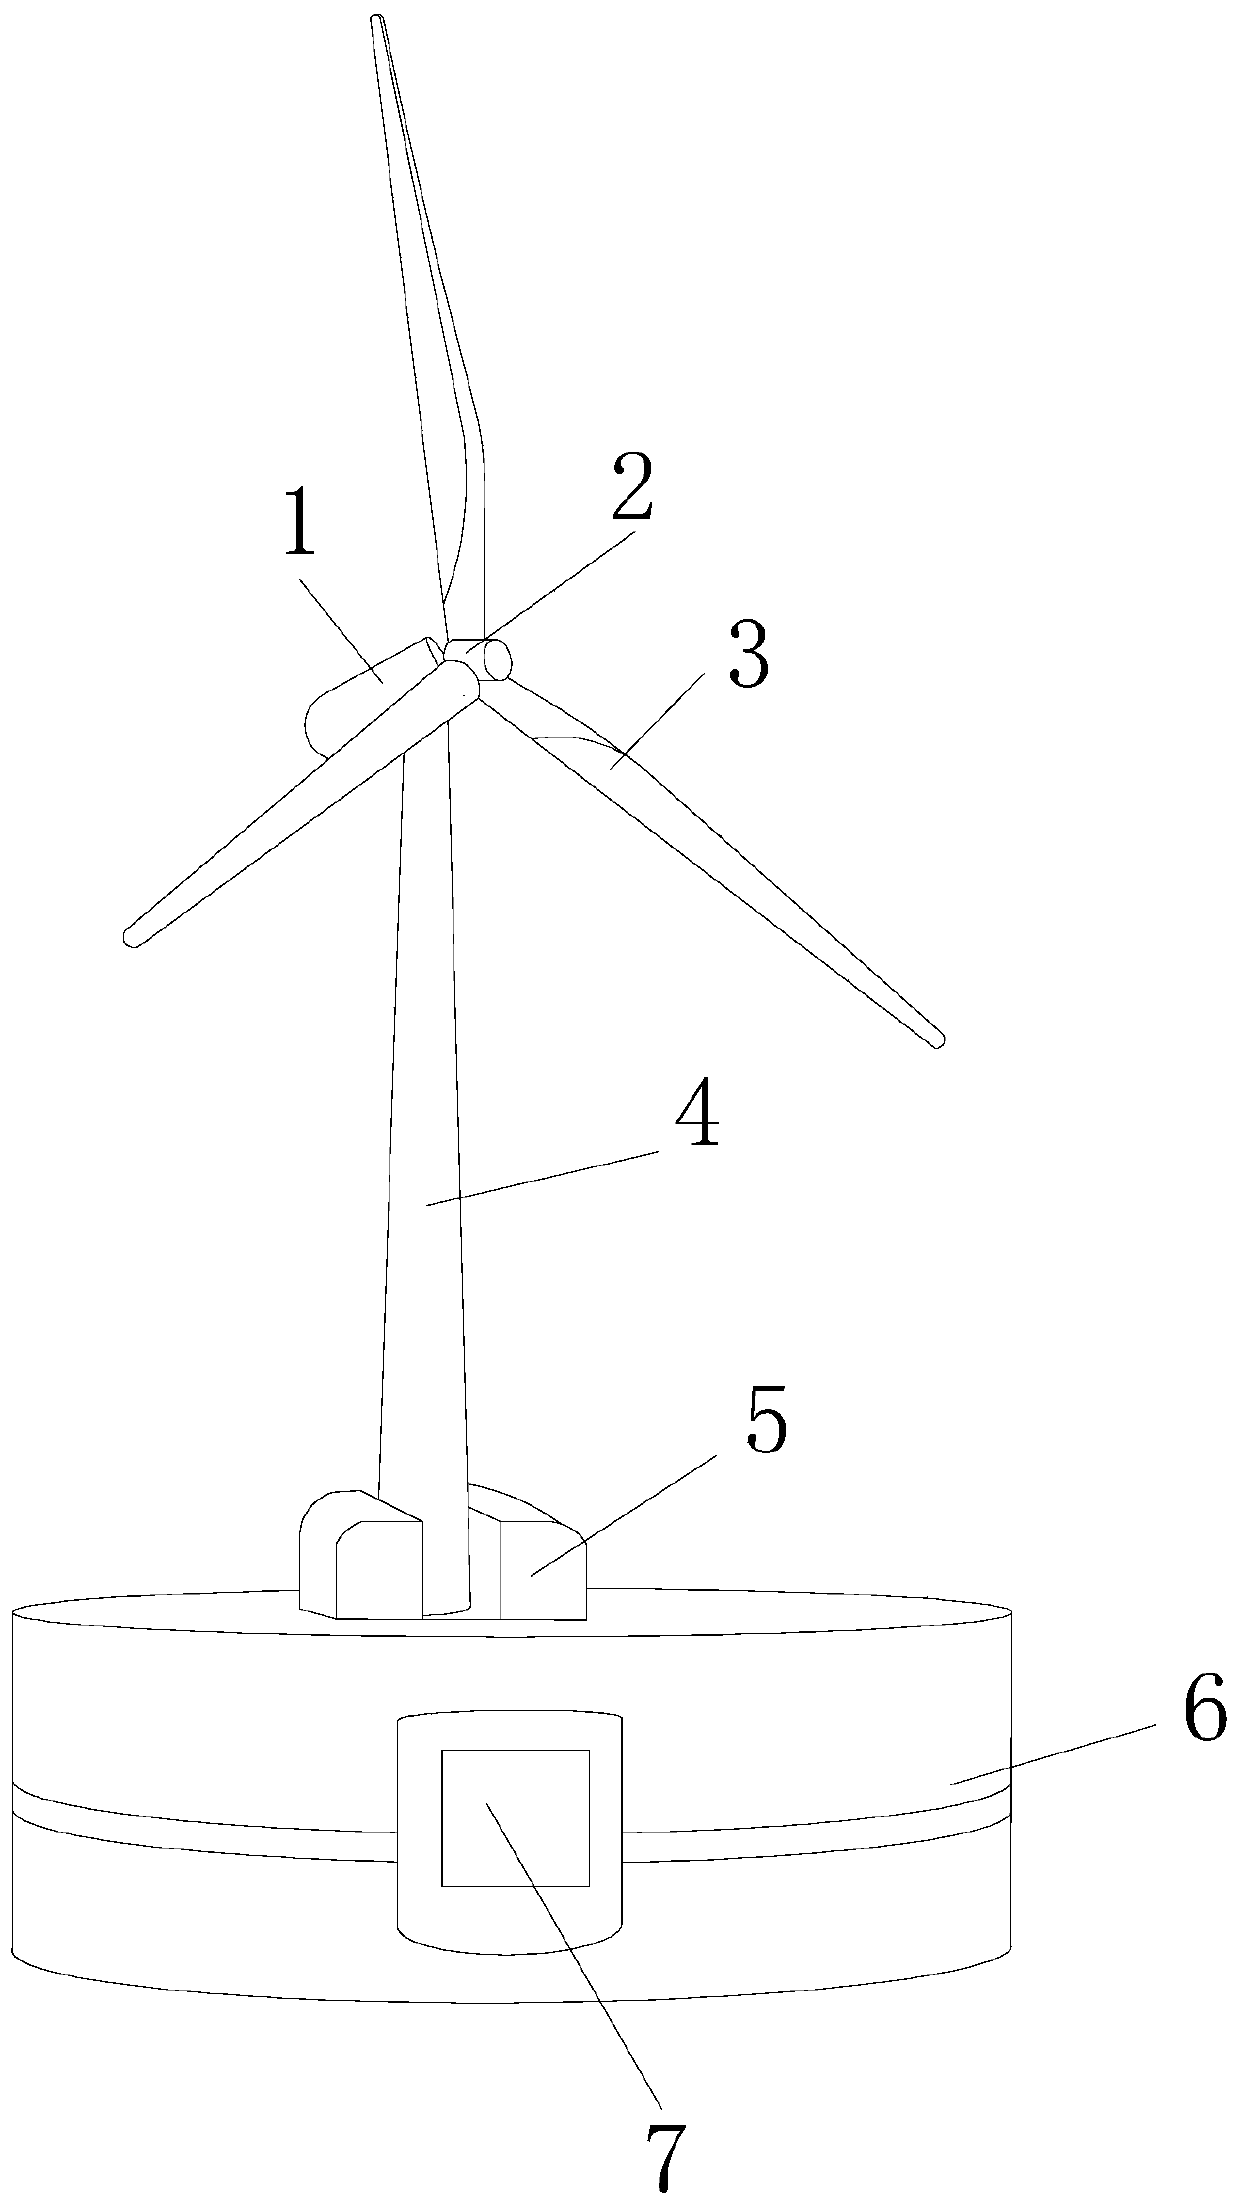 A floating offshore wind power generation device